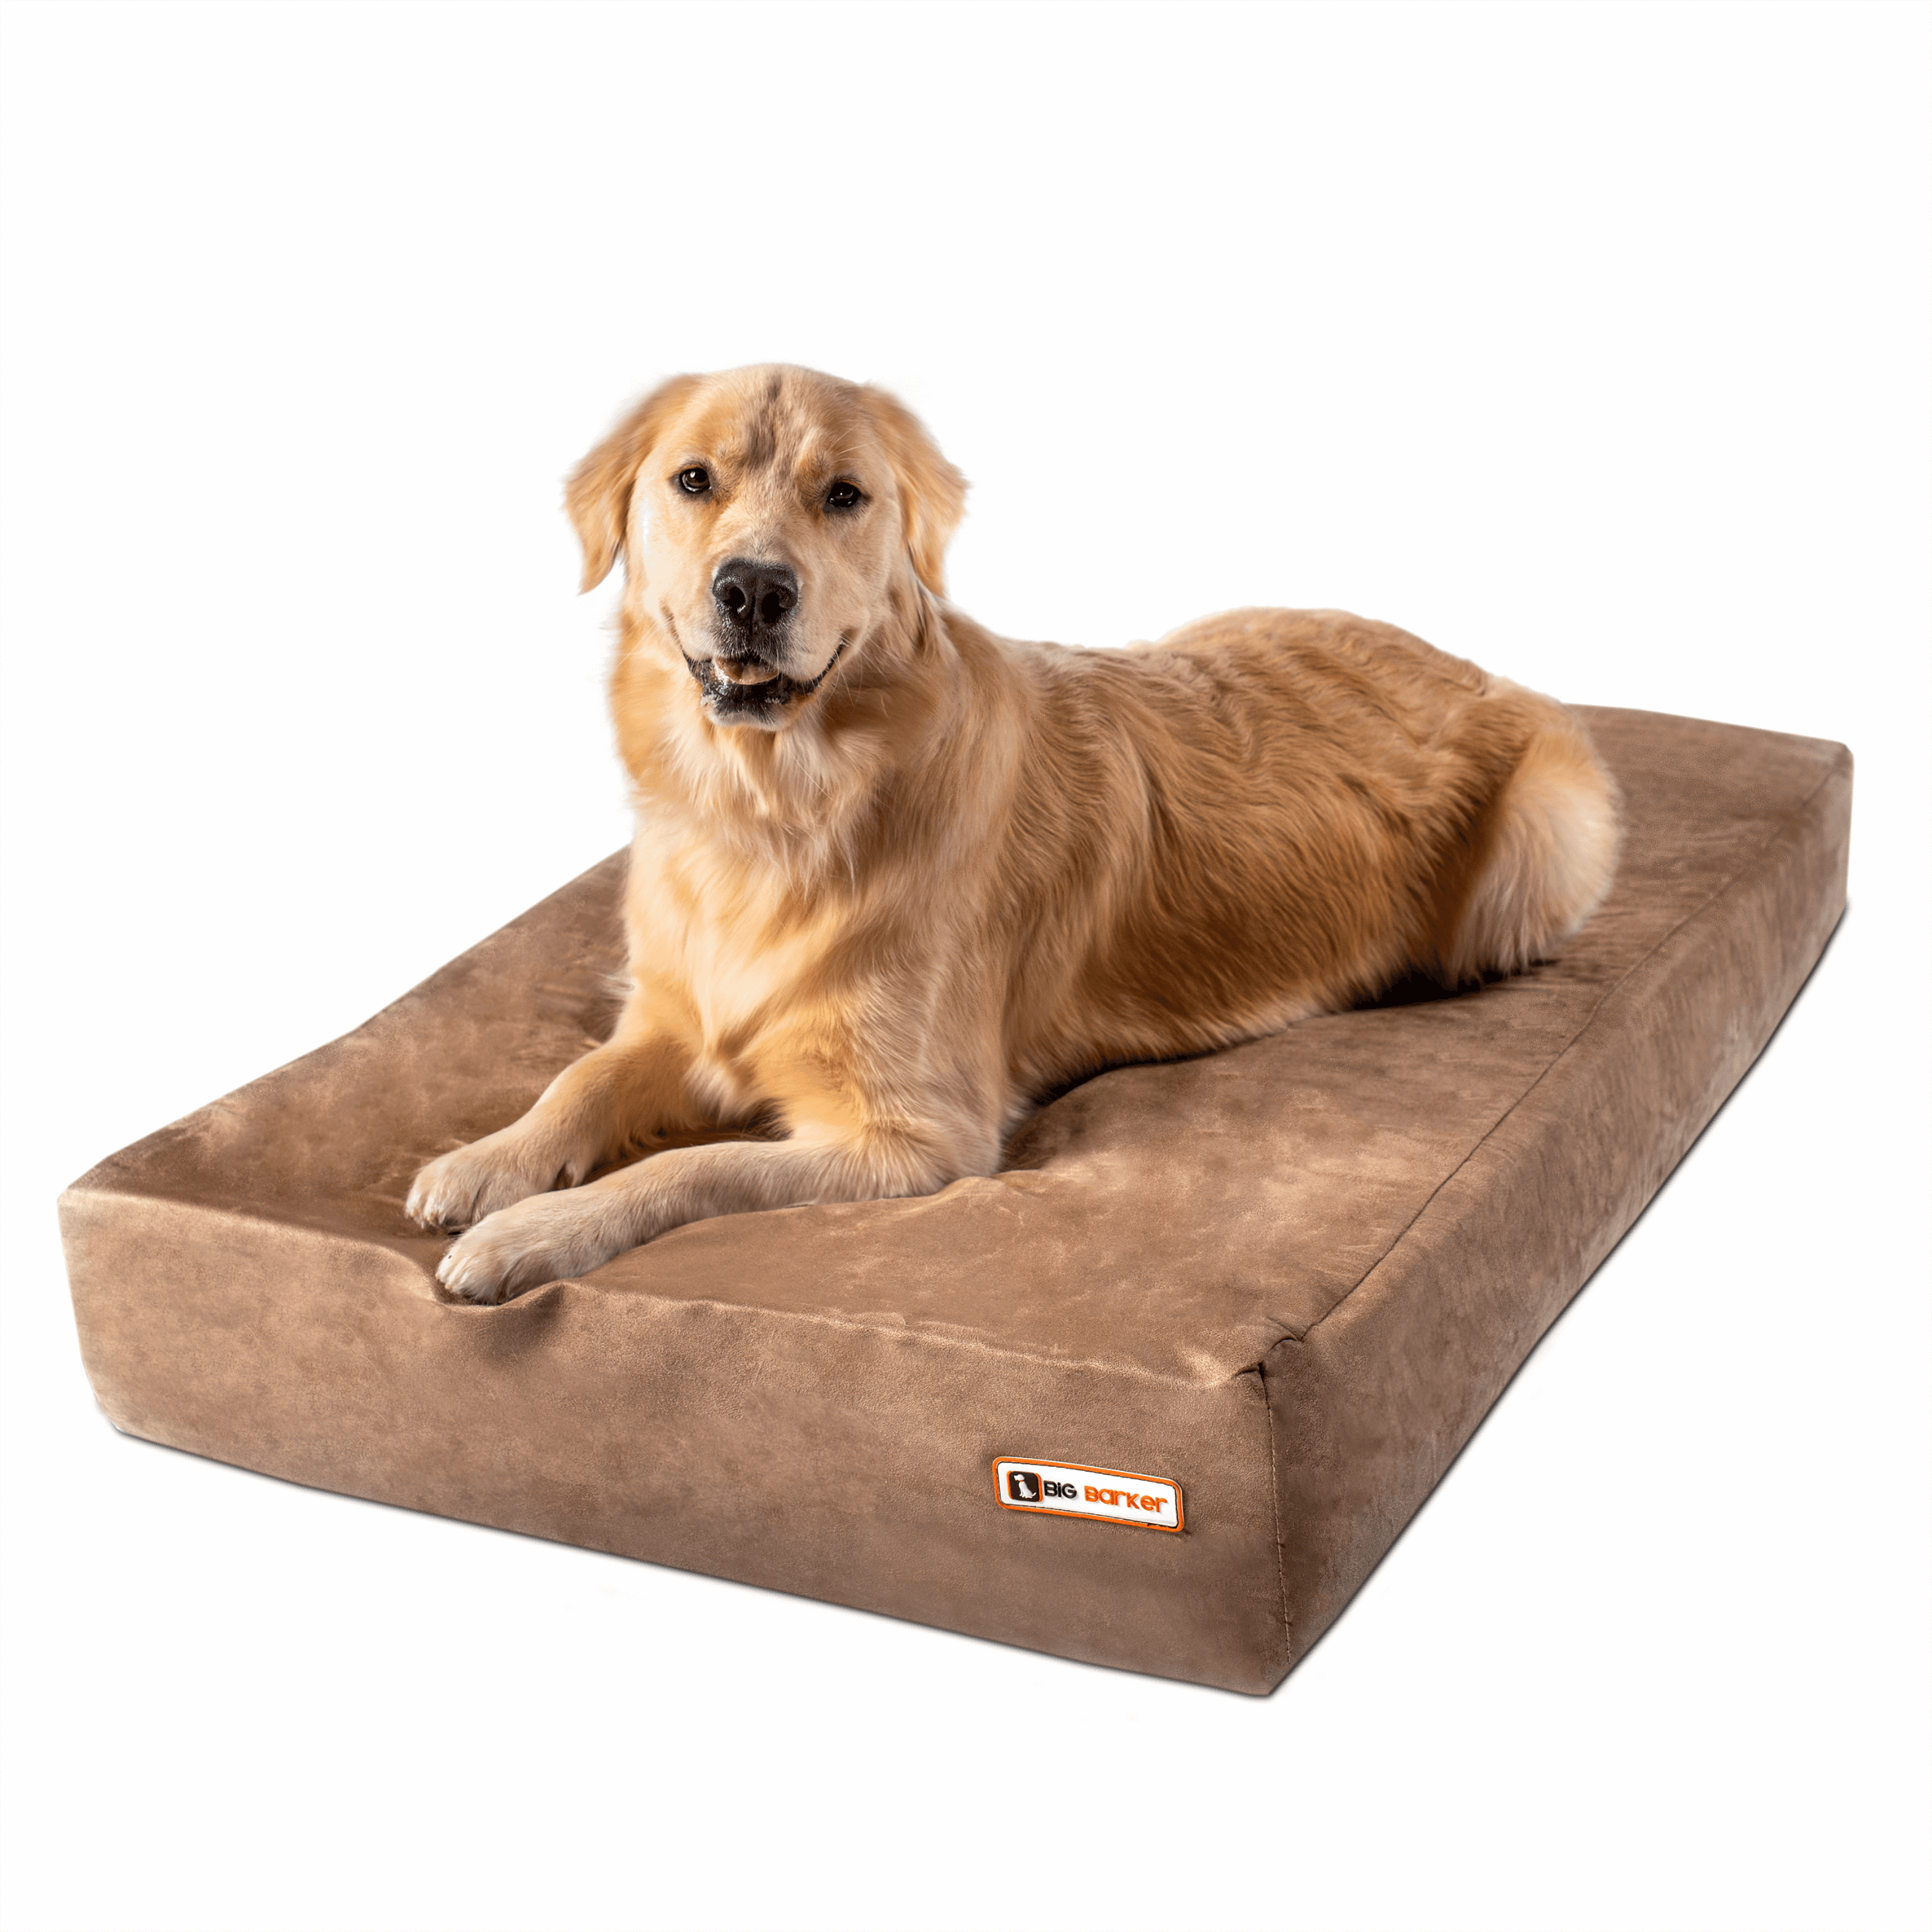 Big Barker 7"  Pillow Top Orthopedic Dog Bed for Large Breed Dogs, Khaki ...